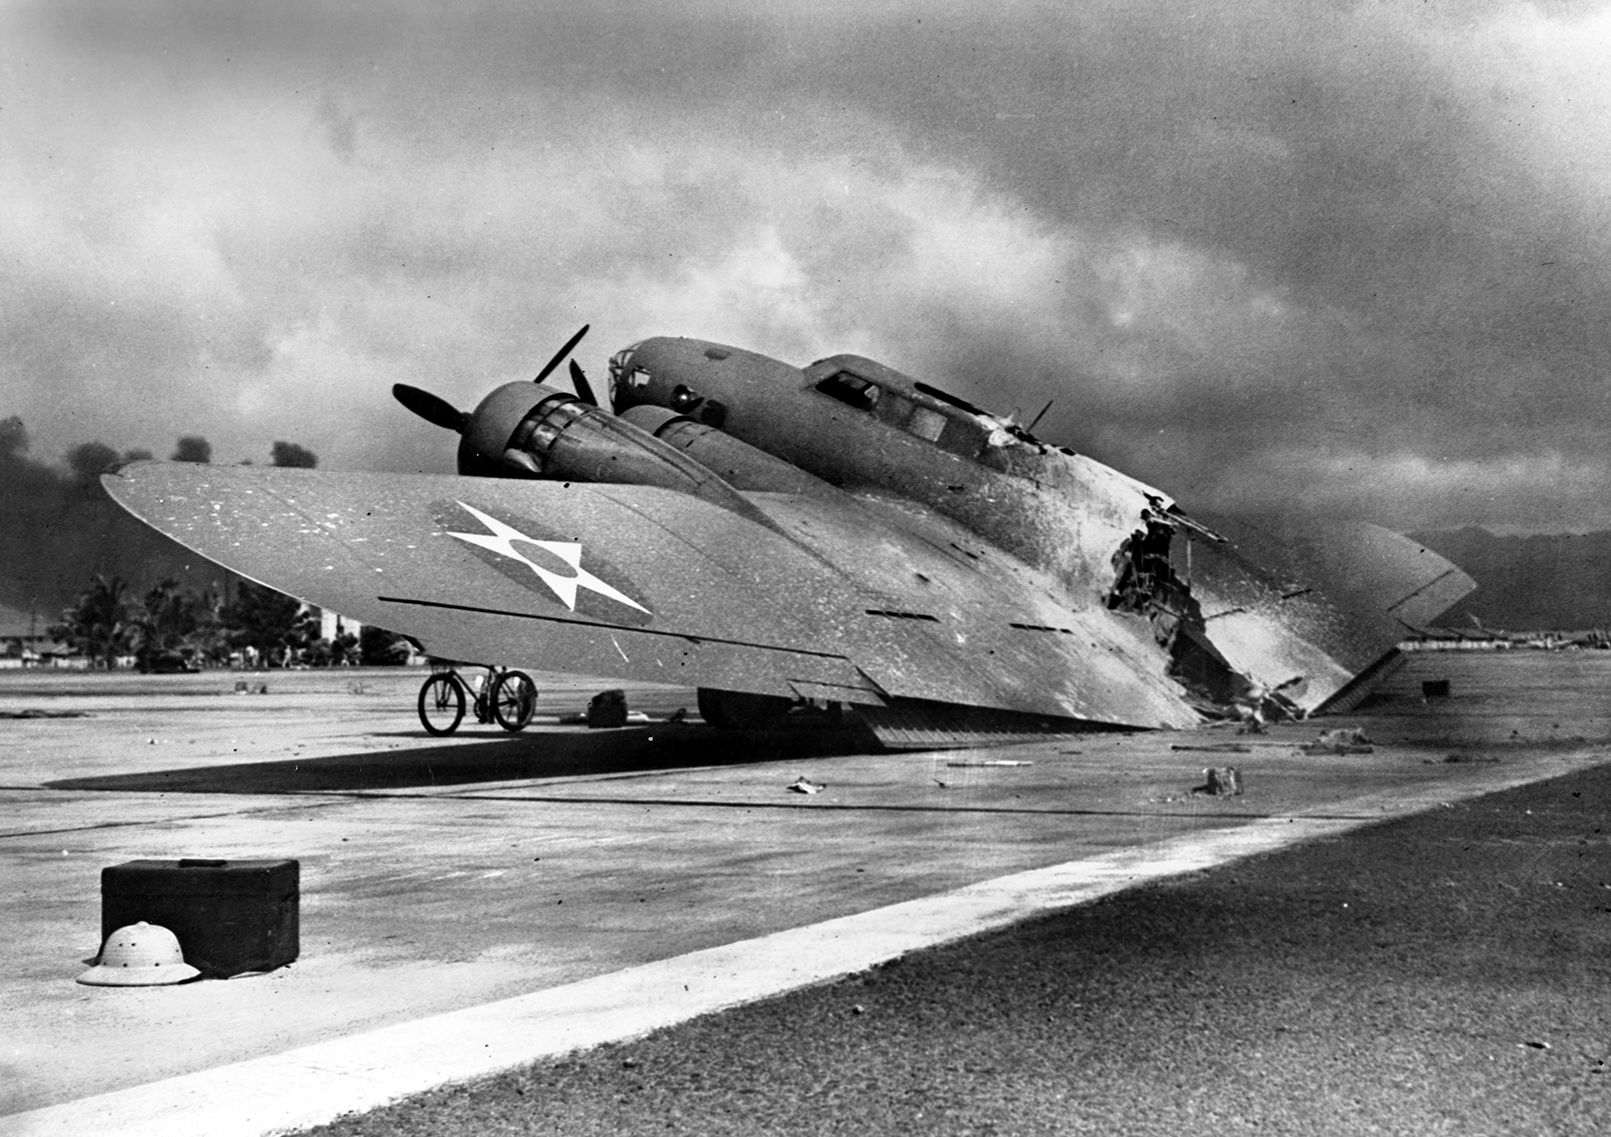 The wrecked U.S. Army Air Force B-17C bomber piloted by Captain Raymond T. Swenson lies on the runway at Hickam Field. Rounds from a Mitsubishi Zero fighter ignited a locker full of magnesium flares that caused the burning bomber to break in half as it landed.